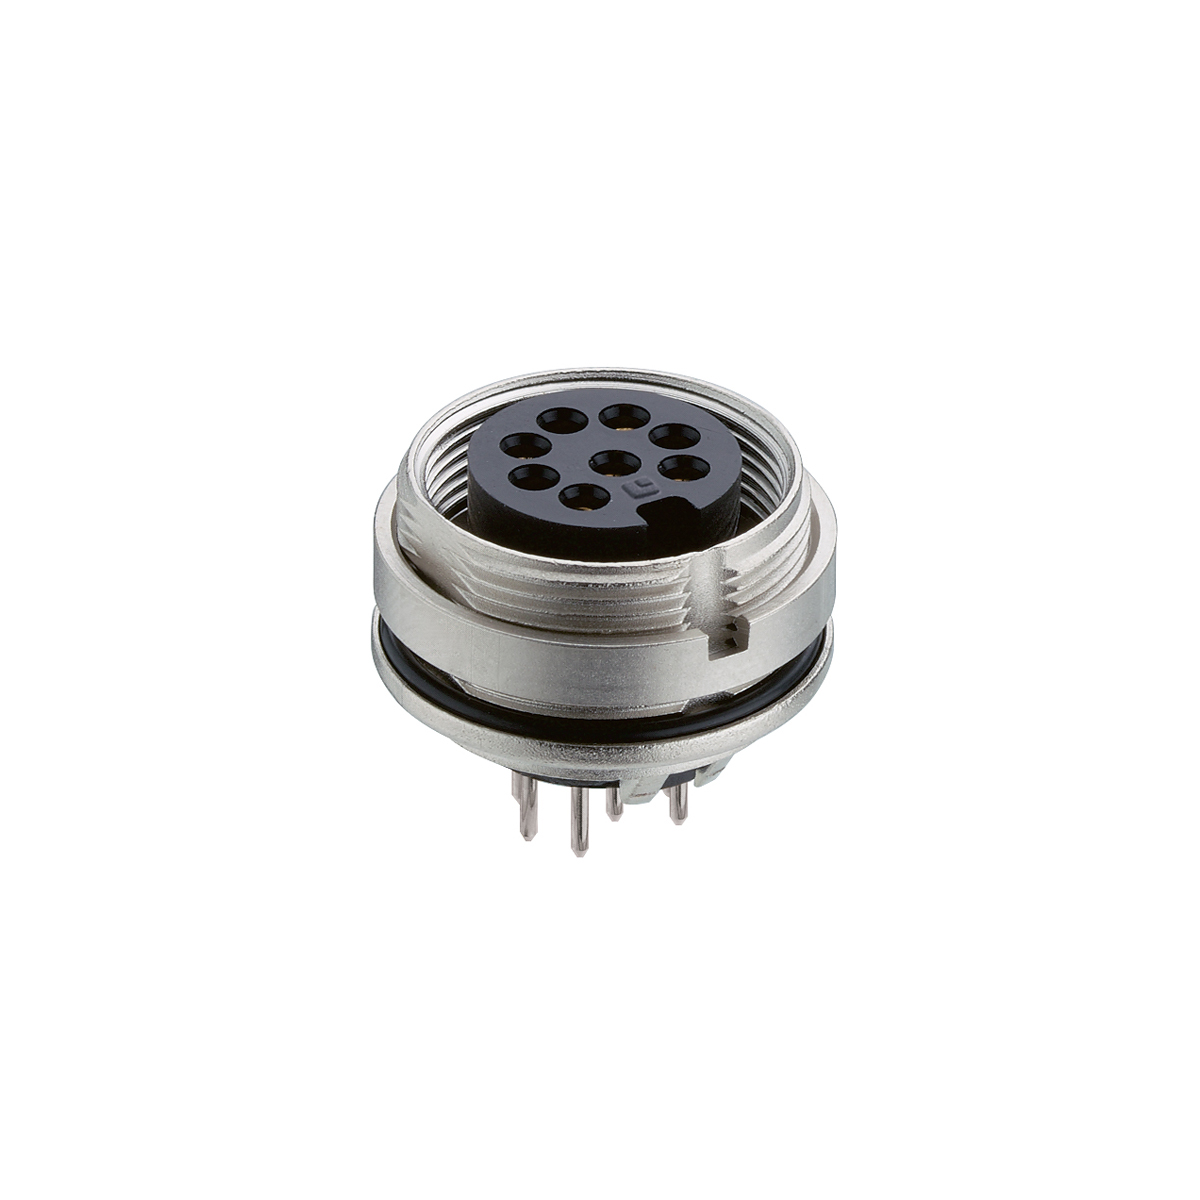 Lumberg: 0307-2 (Series 03 | Circular connectors with threaded joint M16 acc. to IEC 61076-2-106, IP40/IP68)